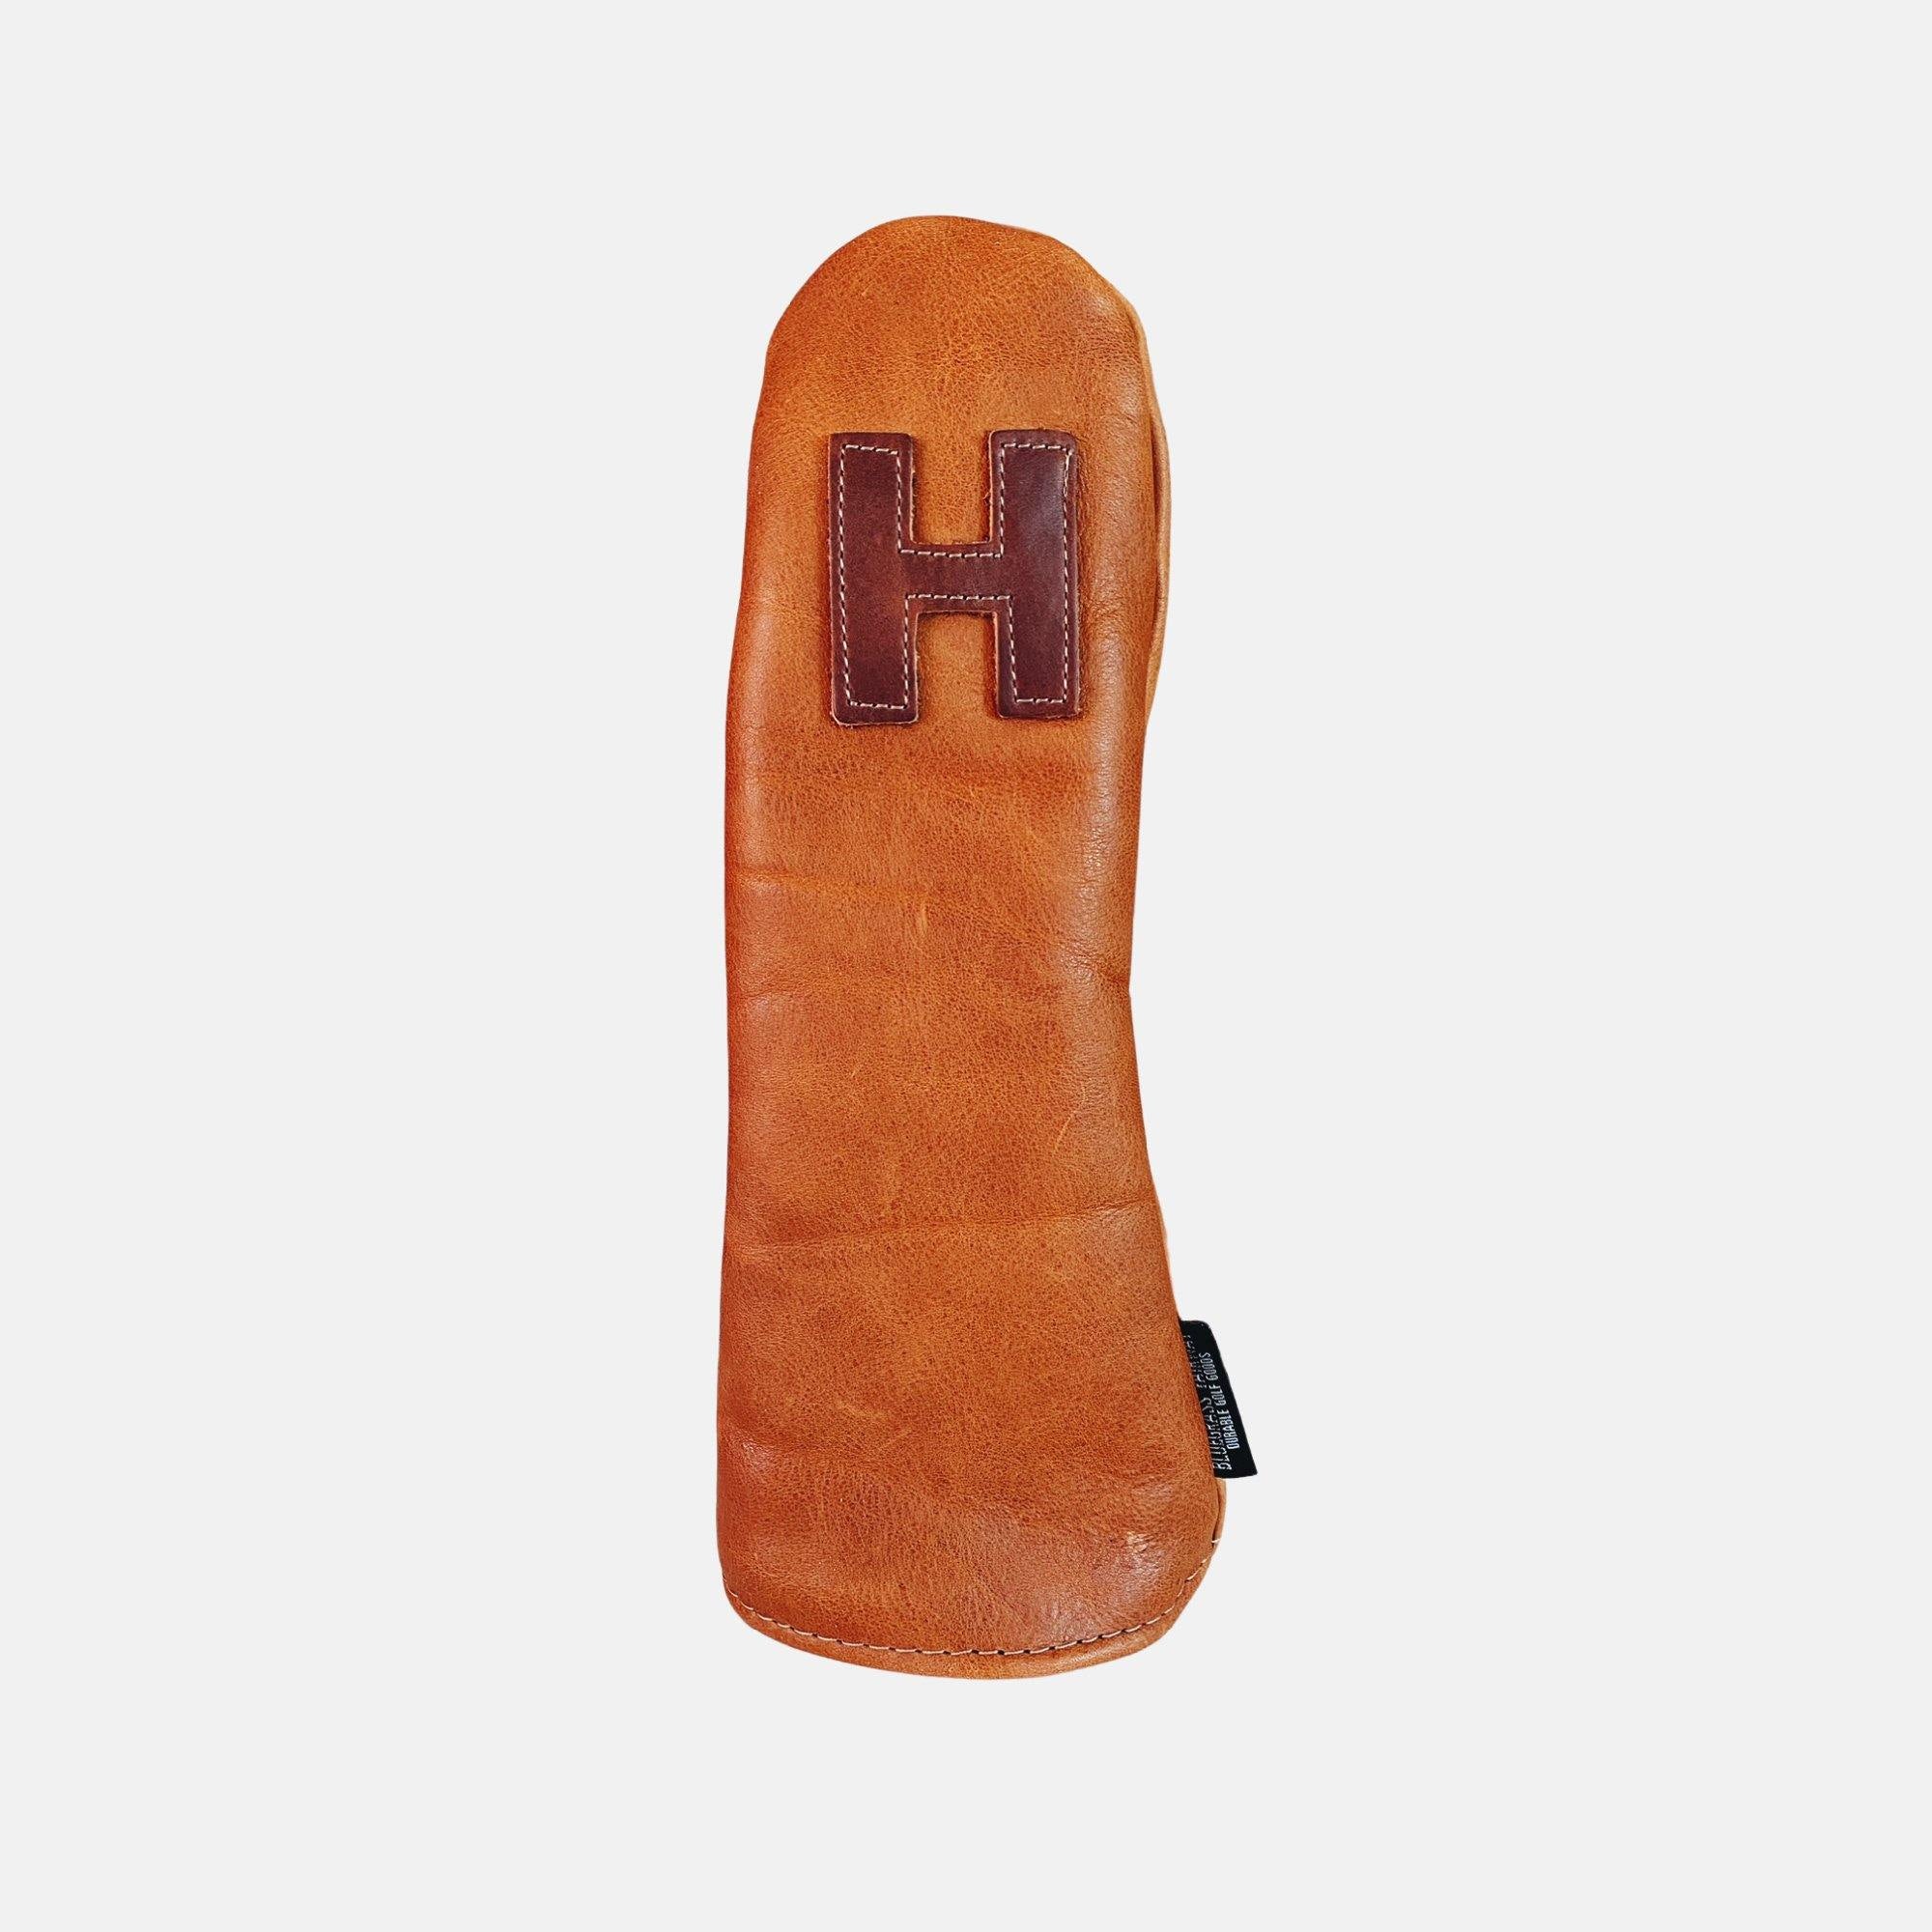 Americana Edition leather golf Headcover in Tan Hybrid